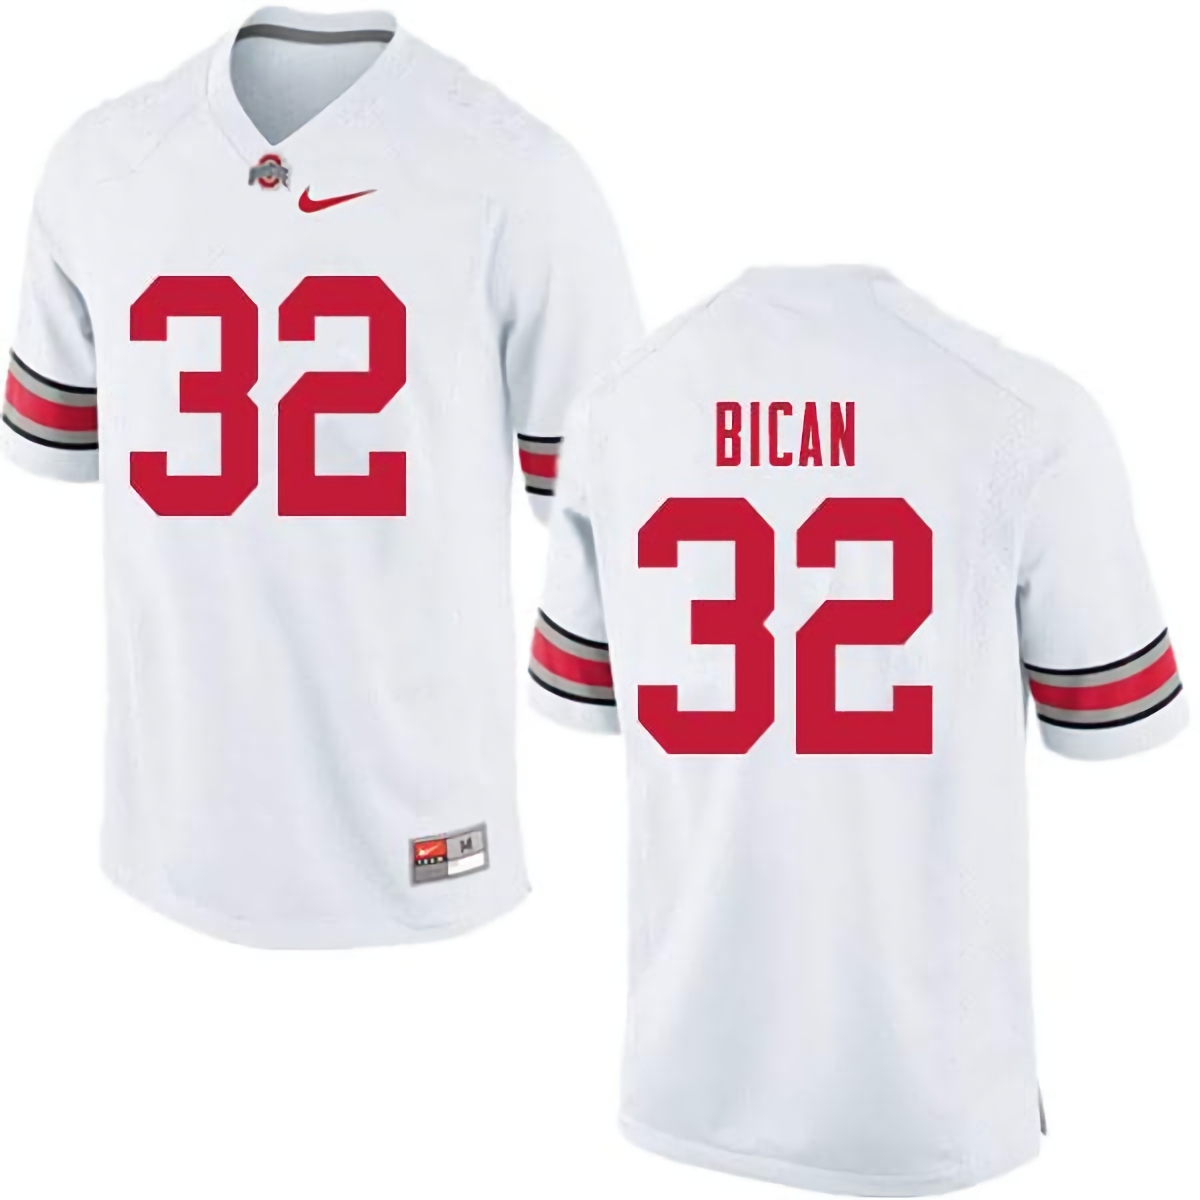 Luciano Bican Ohio State Buckeyes Men's NCAA #32 Nike White College Stitched Football Jersey JPG3756AB